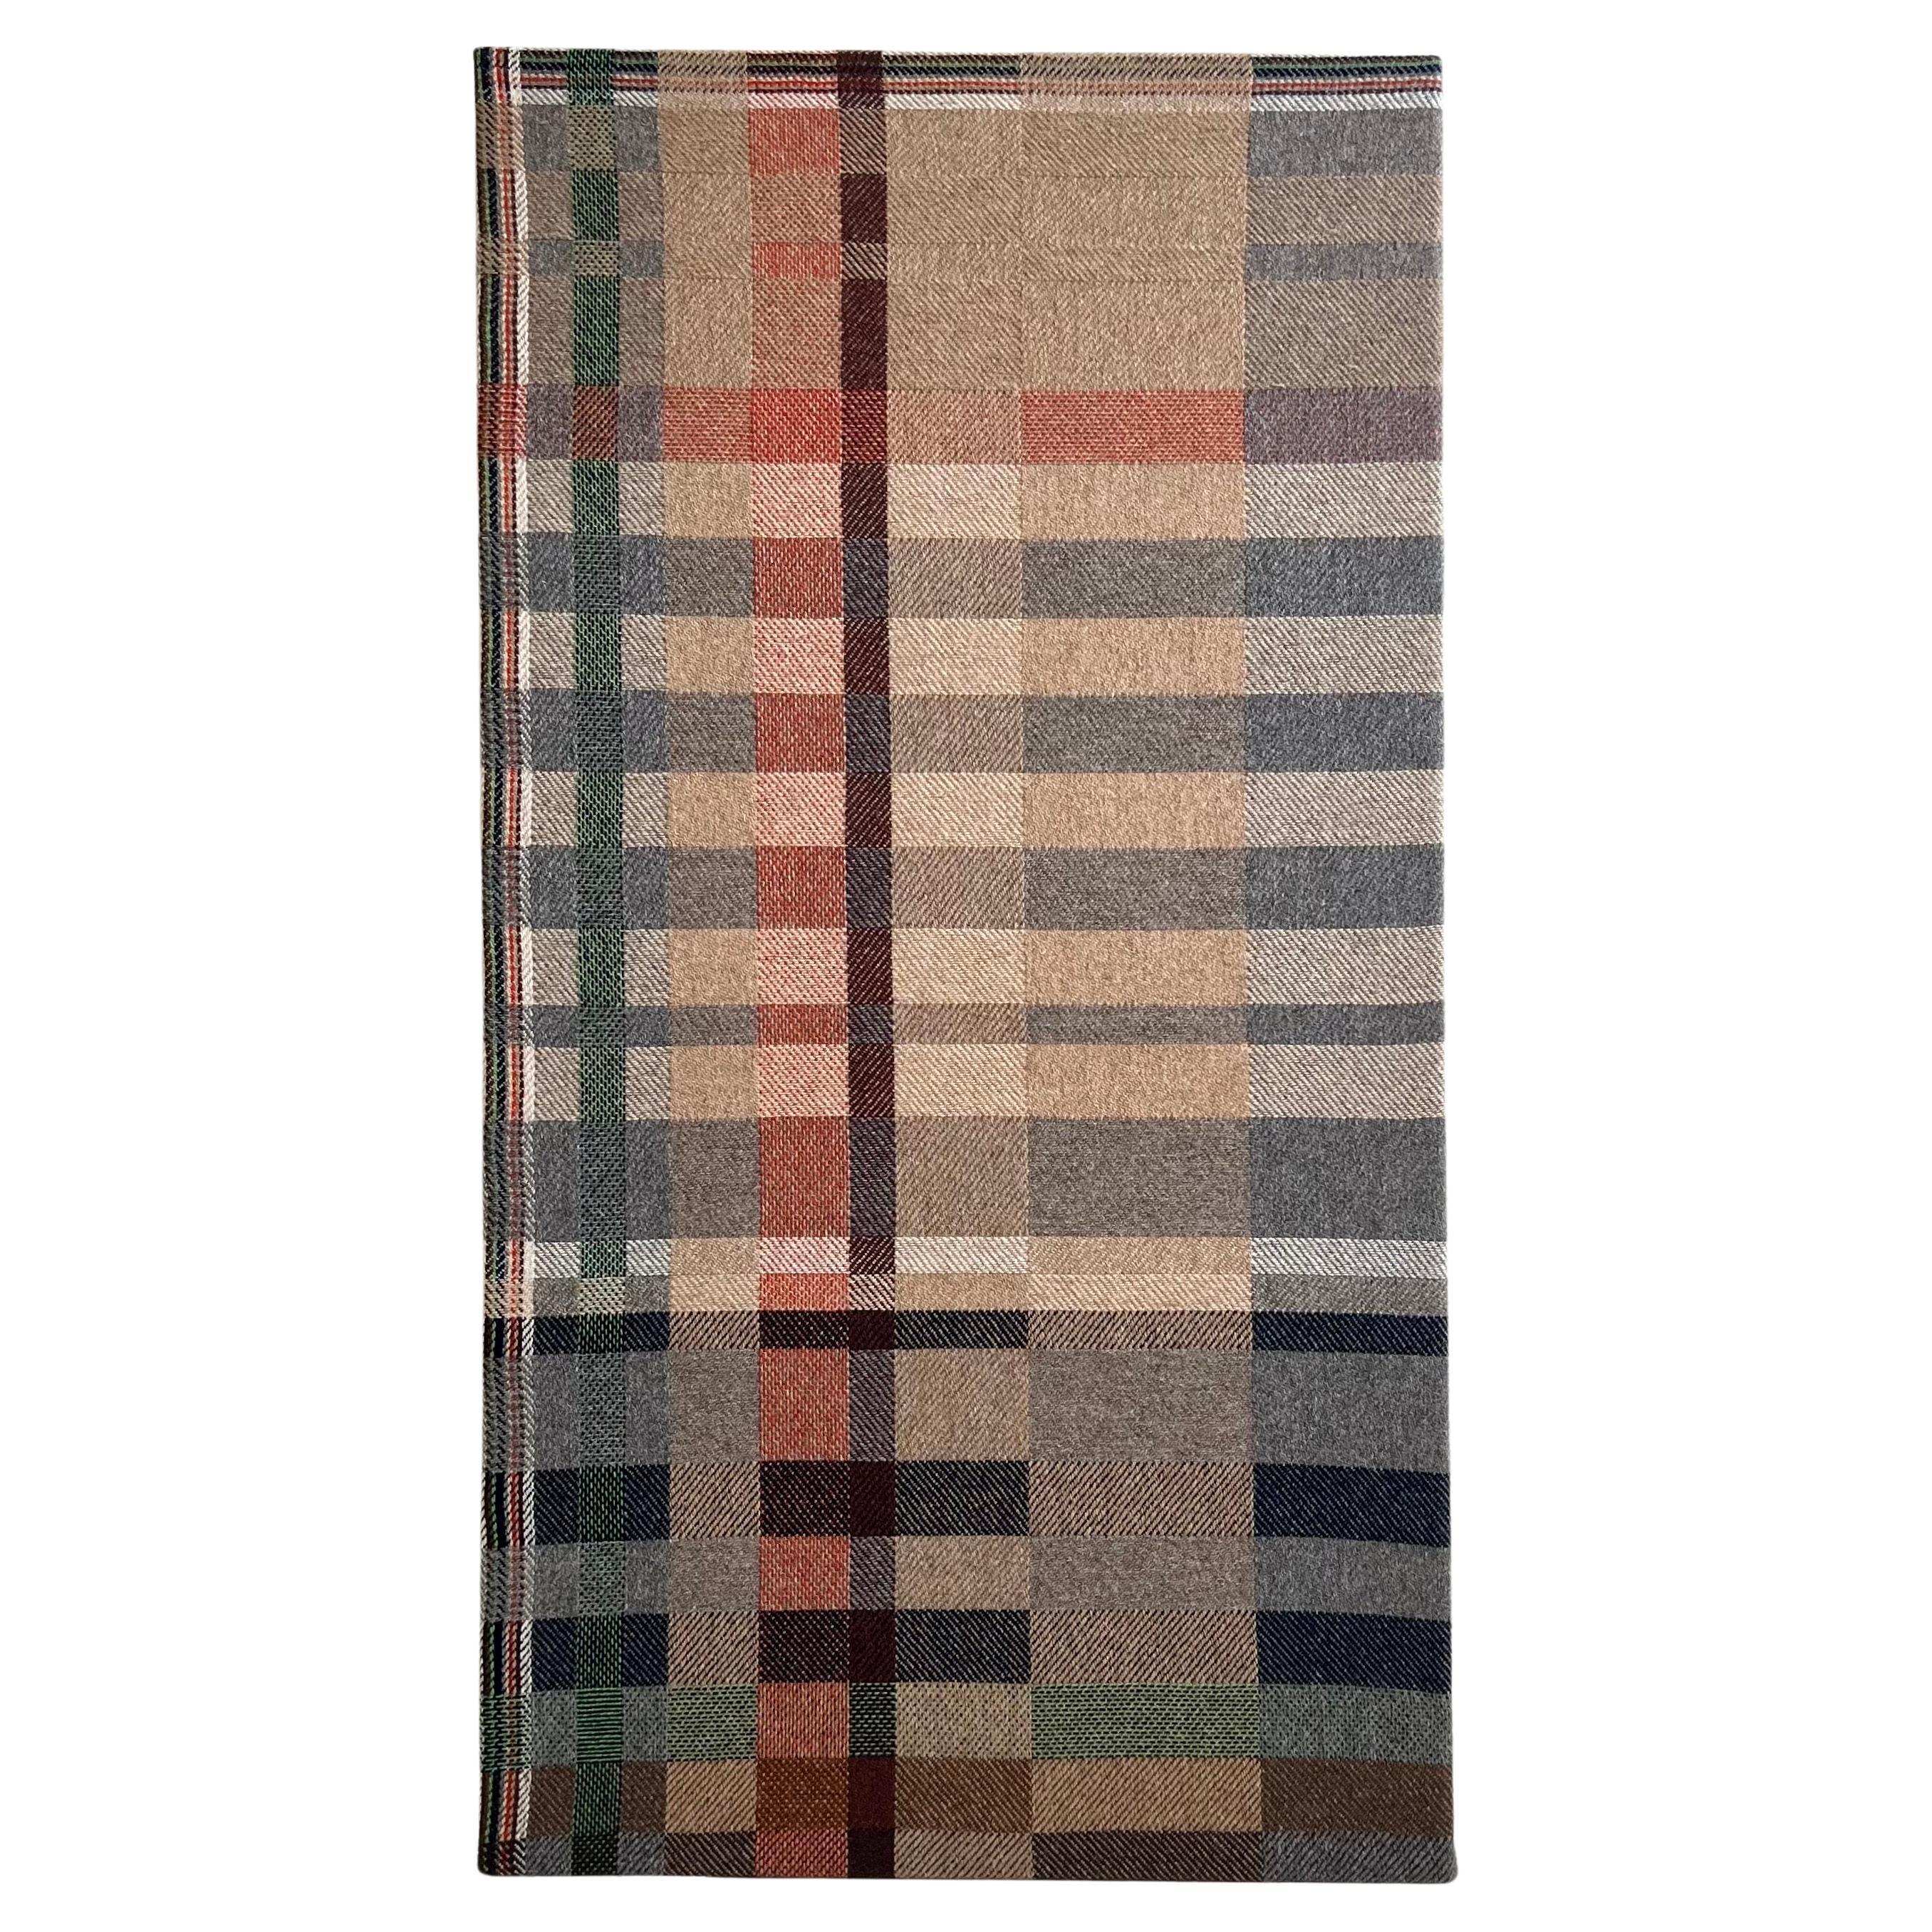 Hand Woven Wall Panel - Merino & Yak - "Across The Universe" by Atelier Le Traon For Sale